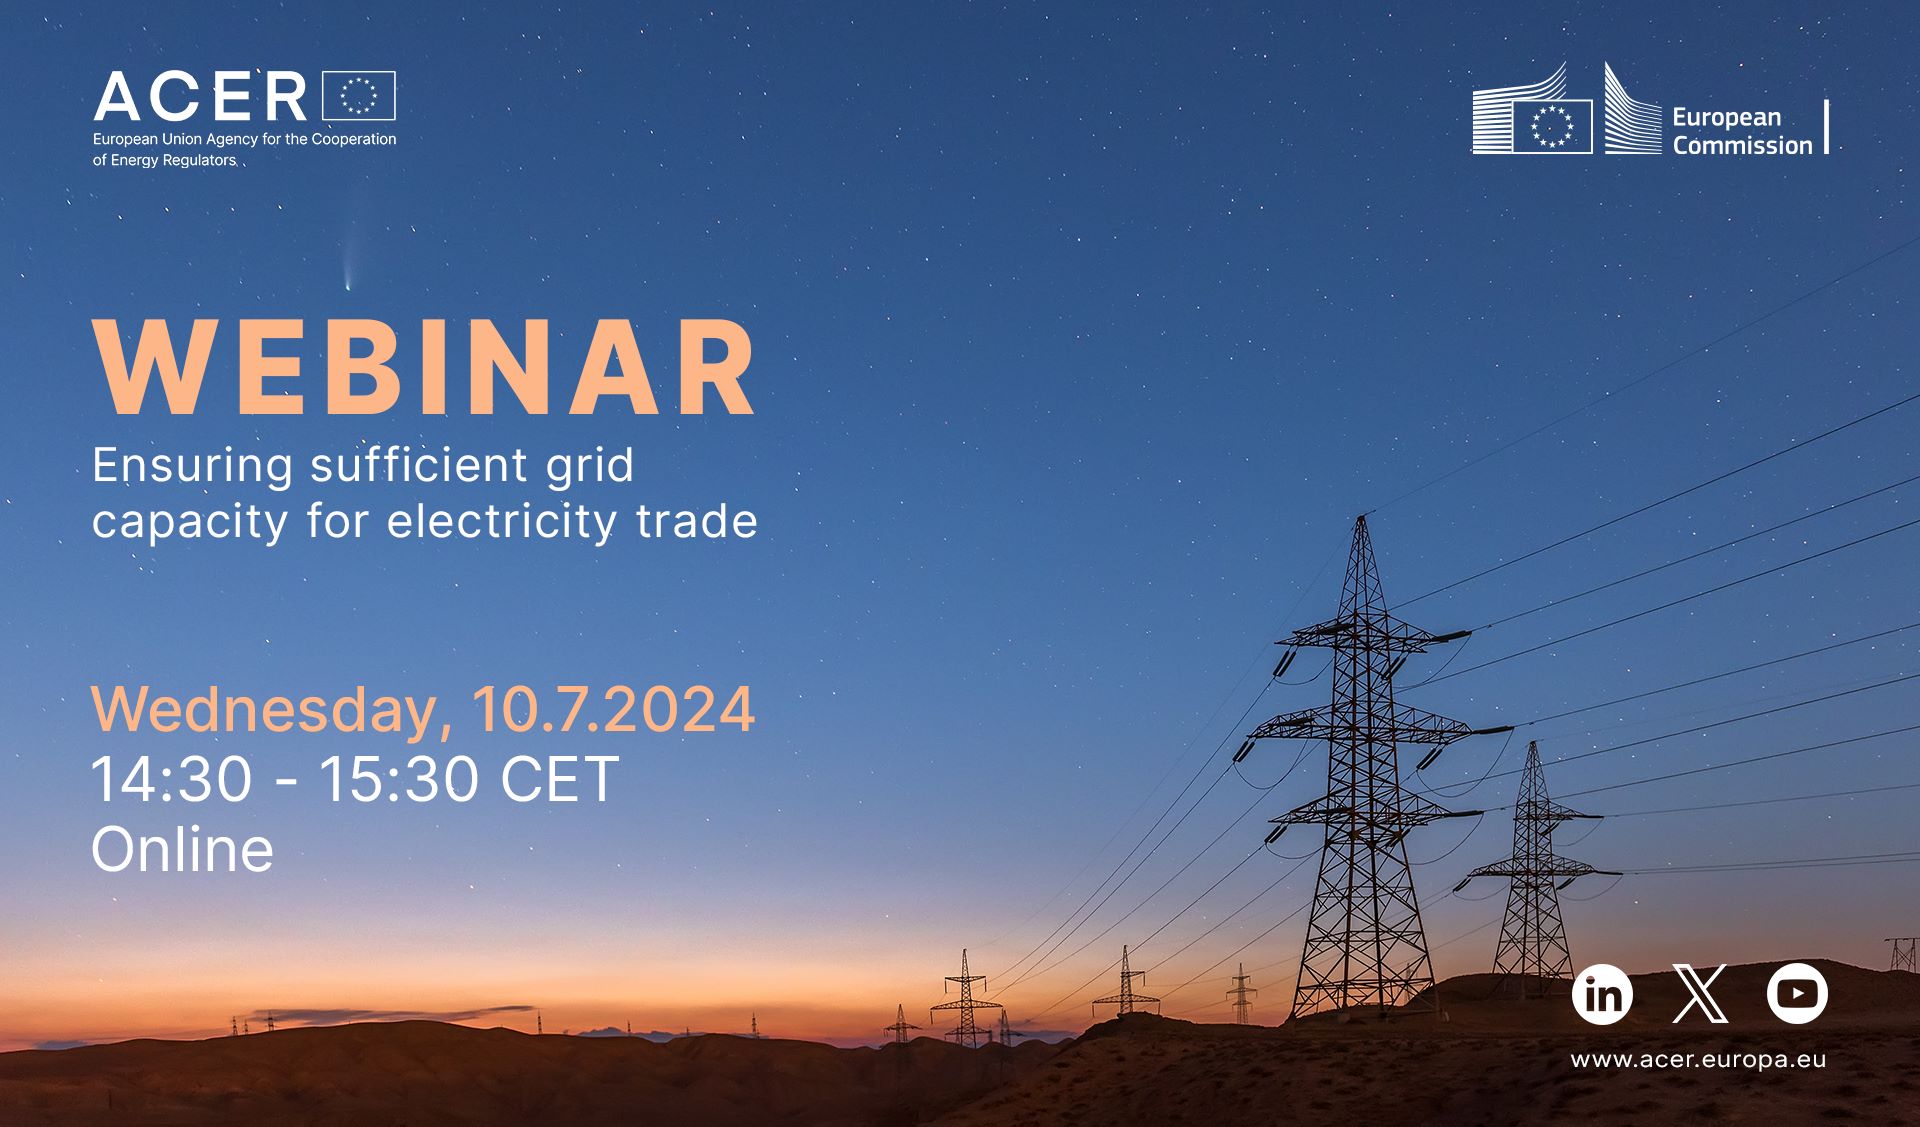 ACER-JRC webinar: ensuring sufficient grid capacity for electricity trade